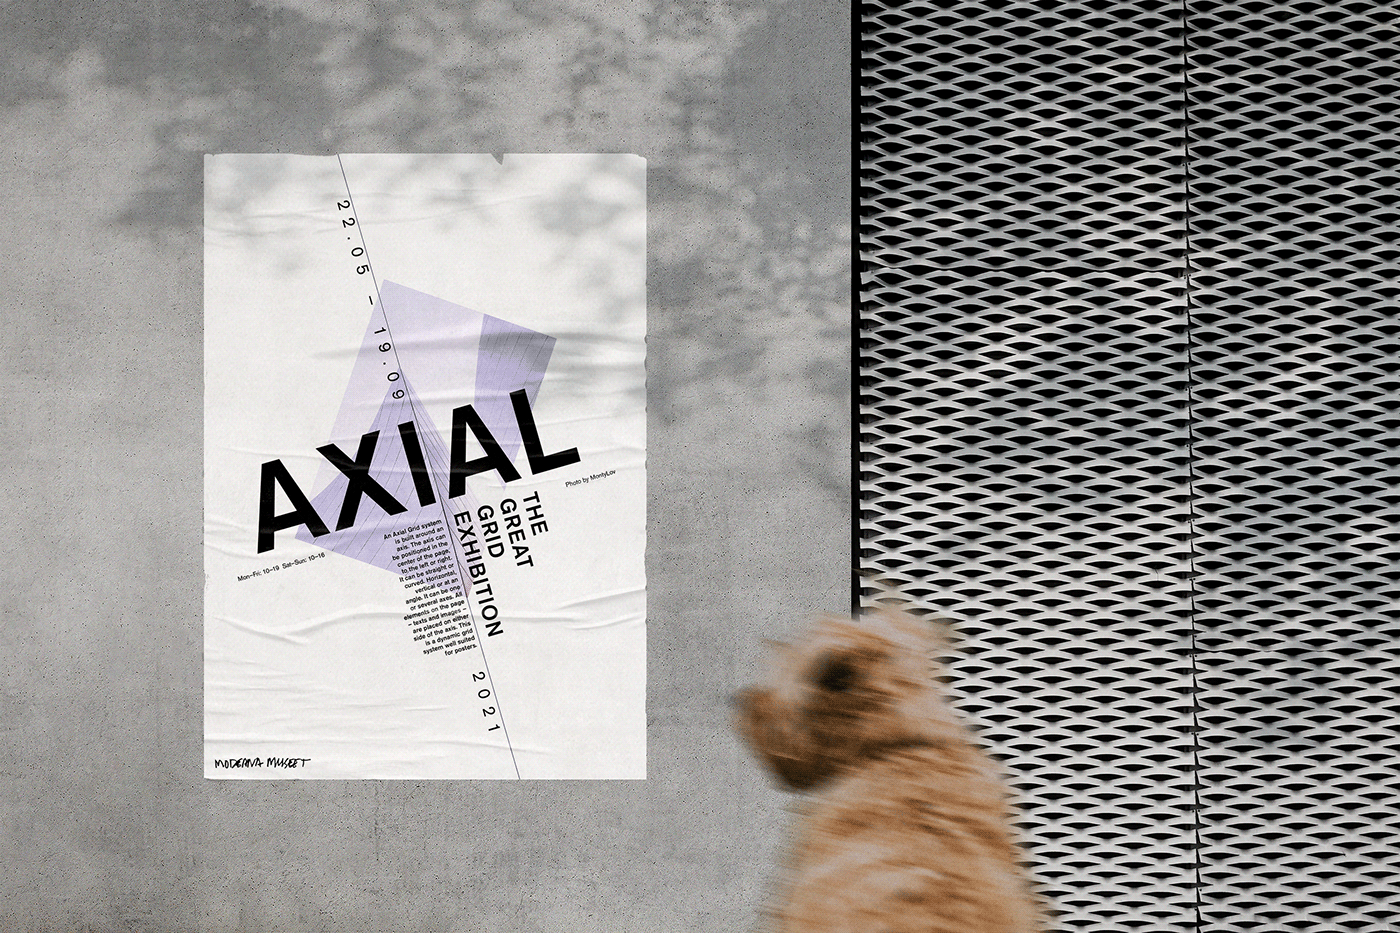 Exhibition  grid grid system poster typography   axial column modular